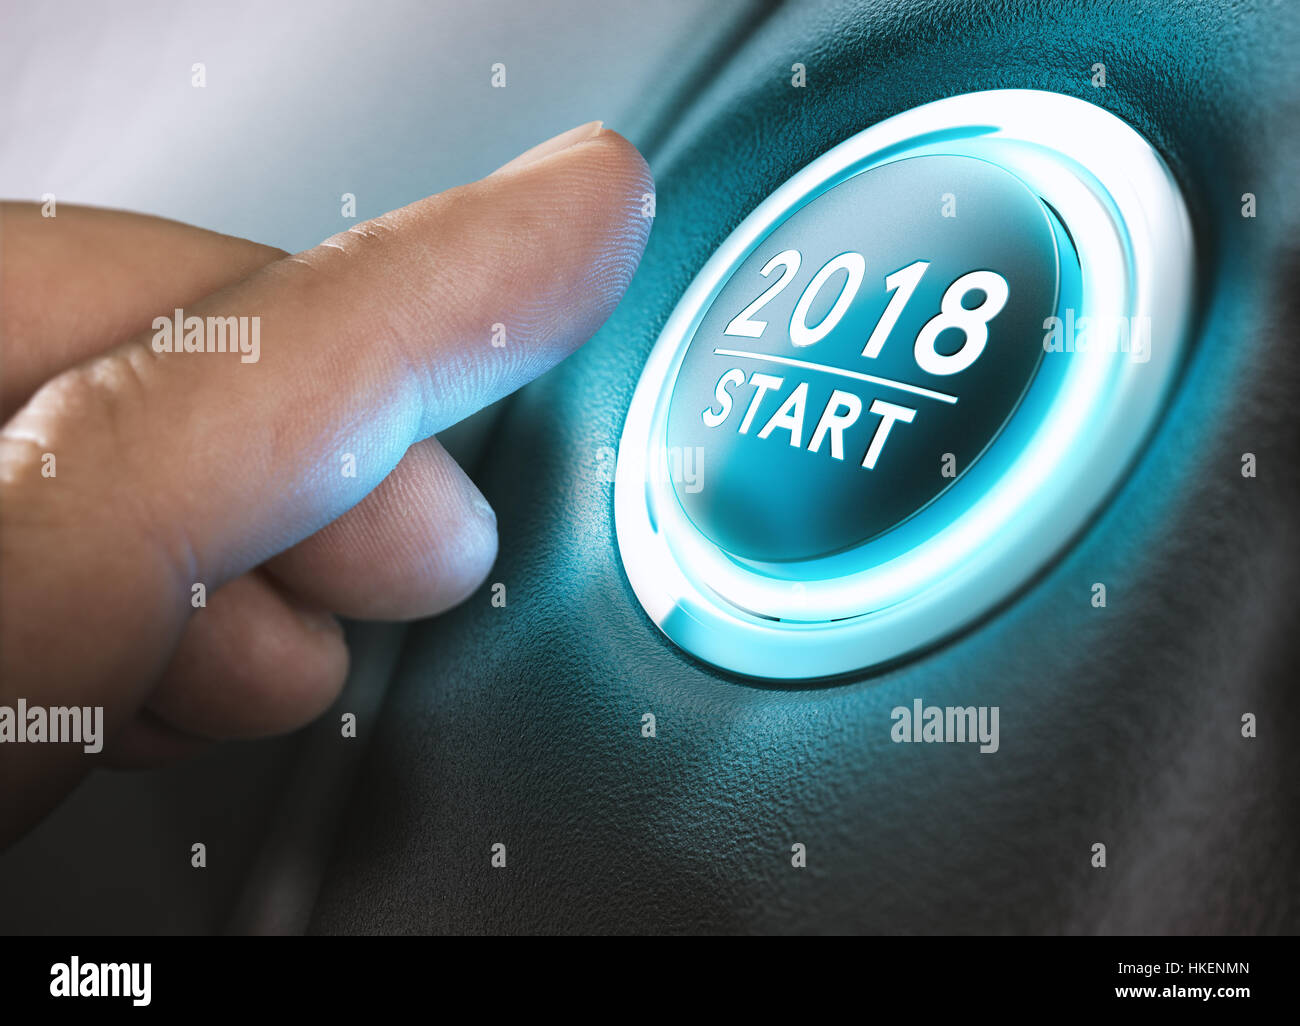 Hand pressing a 2018 start button. Concept of new year, two thousand eighteen. Composite between a photography and a 3D background. Horizontal image Stock Photo